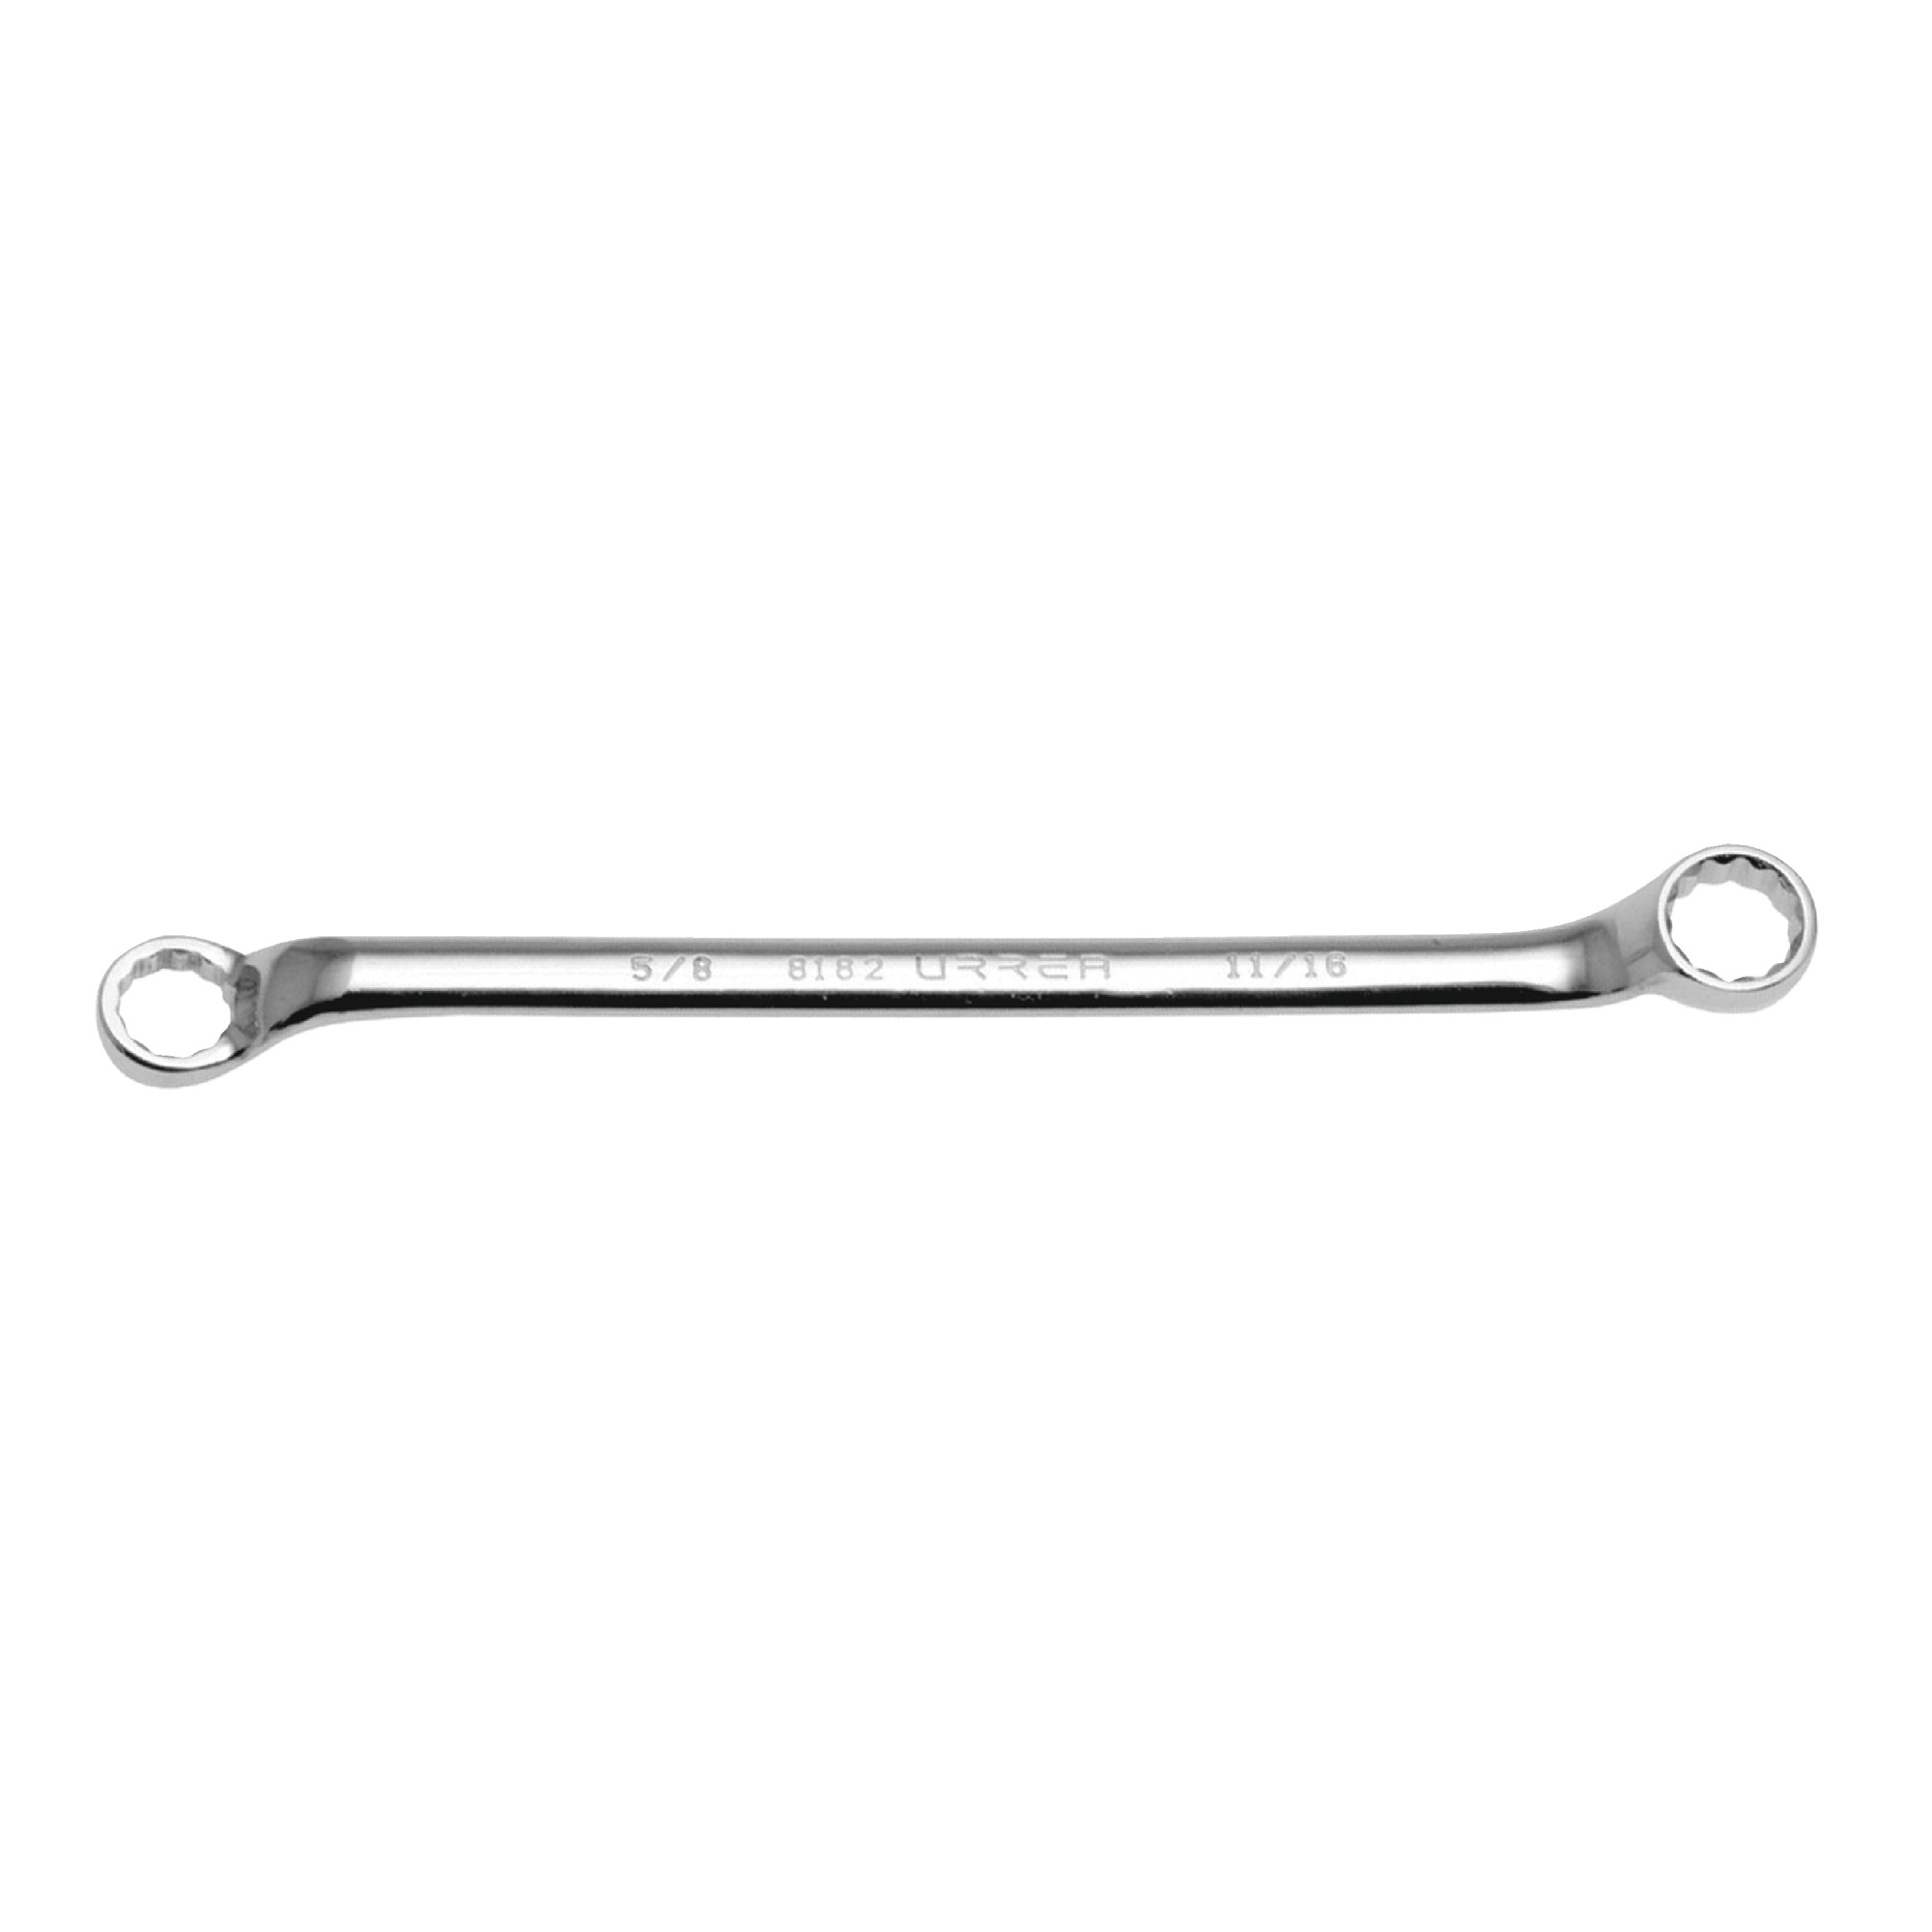 82426 24mm x 26mm Chrome Finish 12 Point Box End Wrench